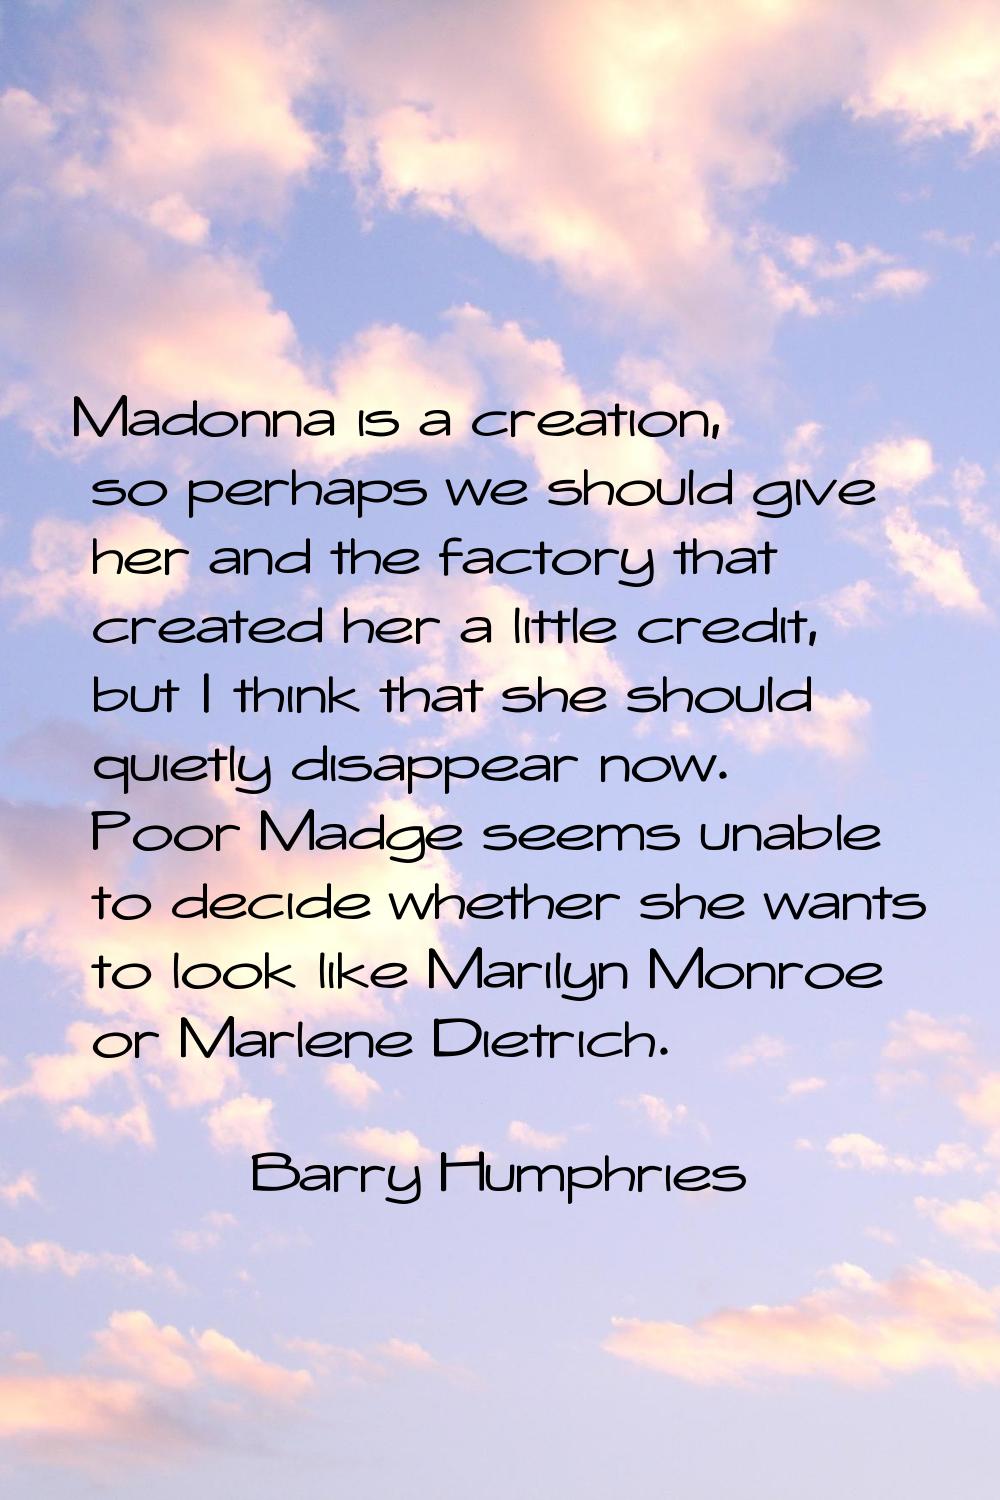 Madonna is a creation, so perhaps we should give her and the factory that created her a little cred